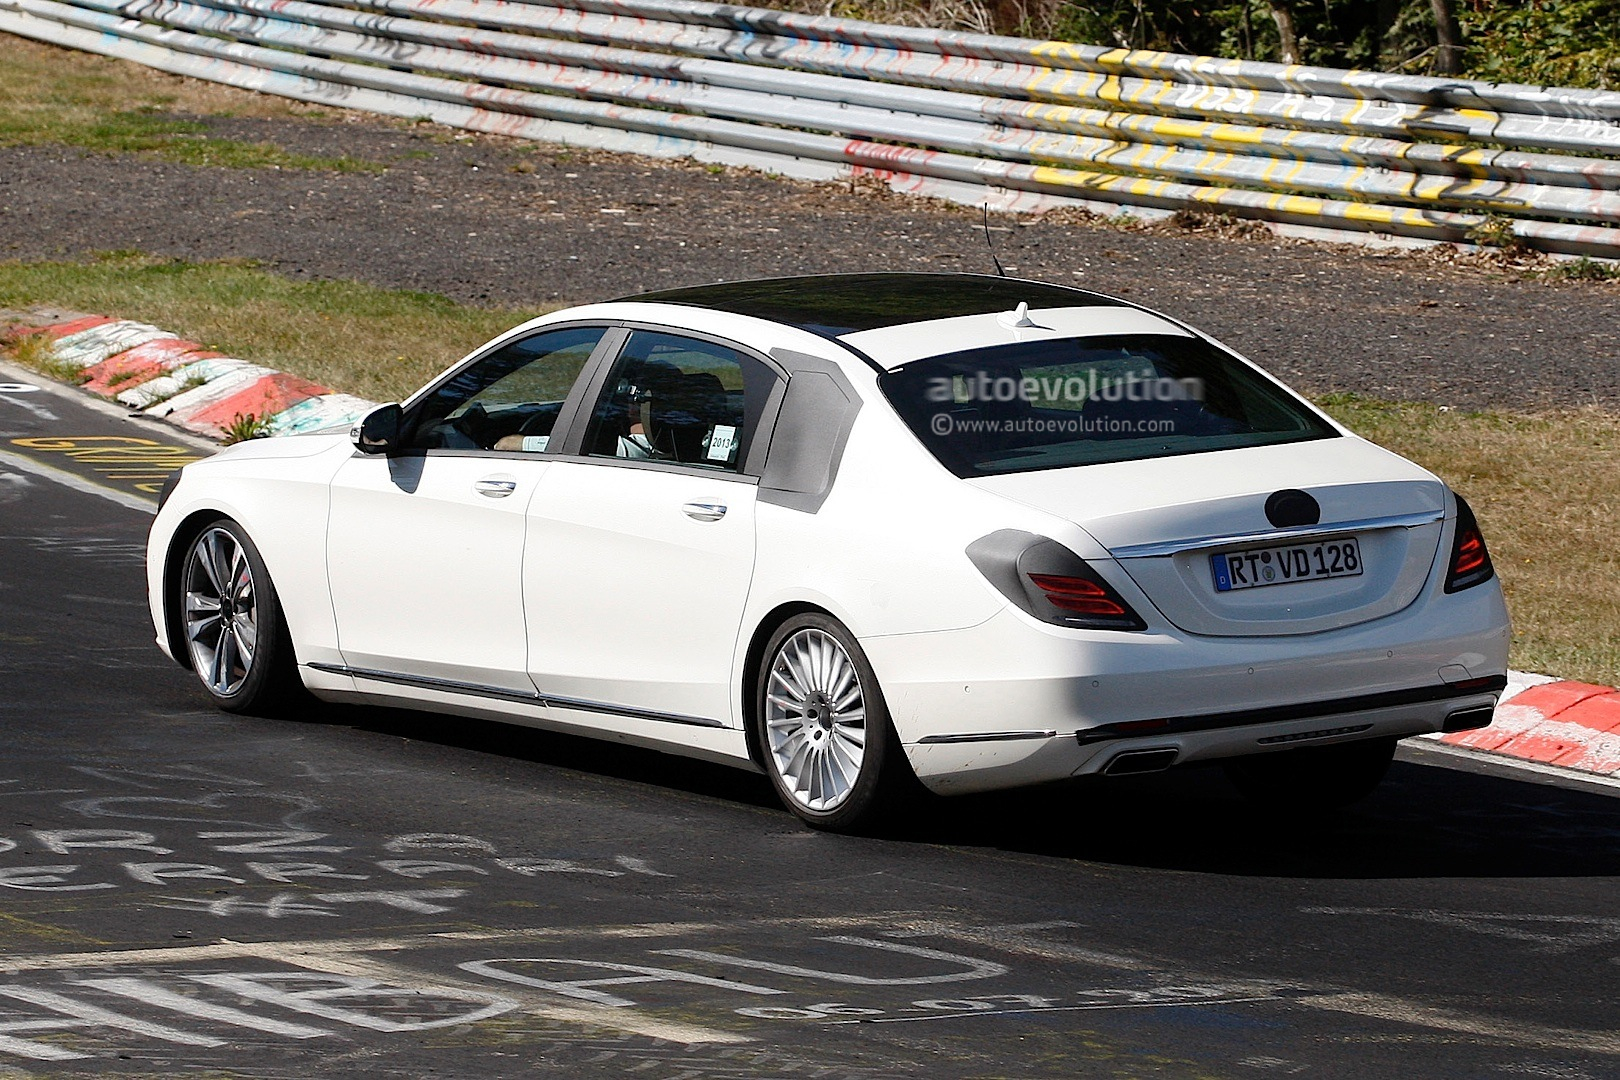 long-wheelbase-s-class-wafting-on-the-nurburgring-photo-gallery_4